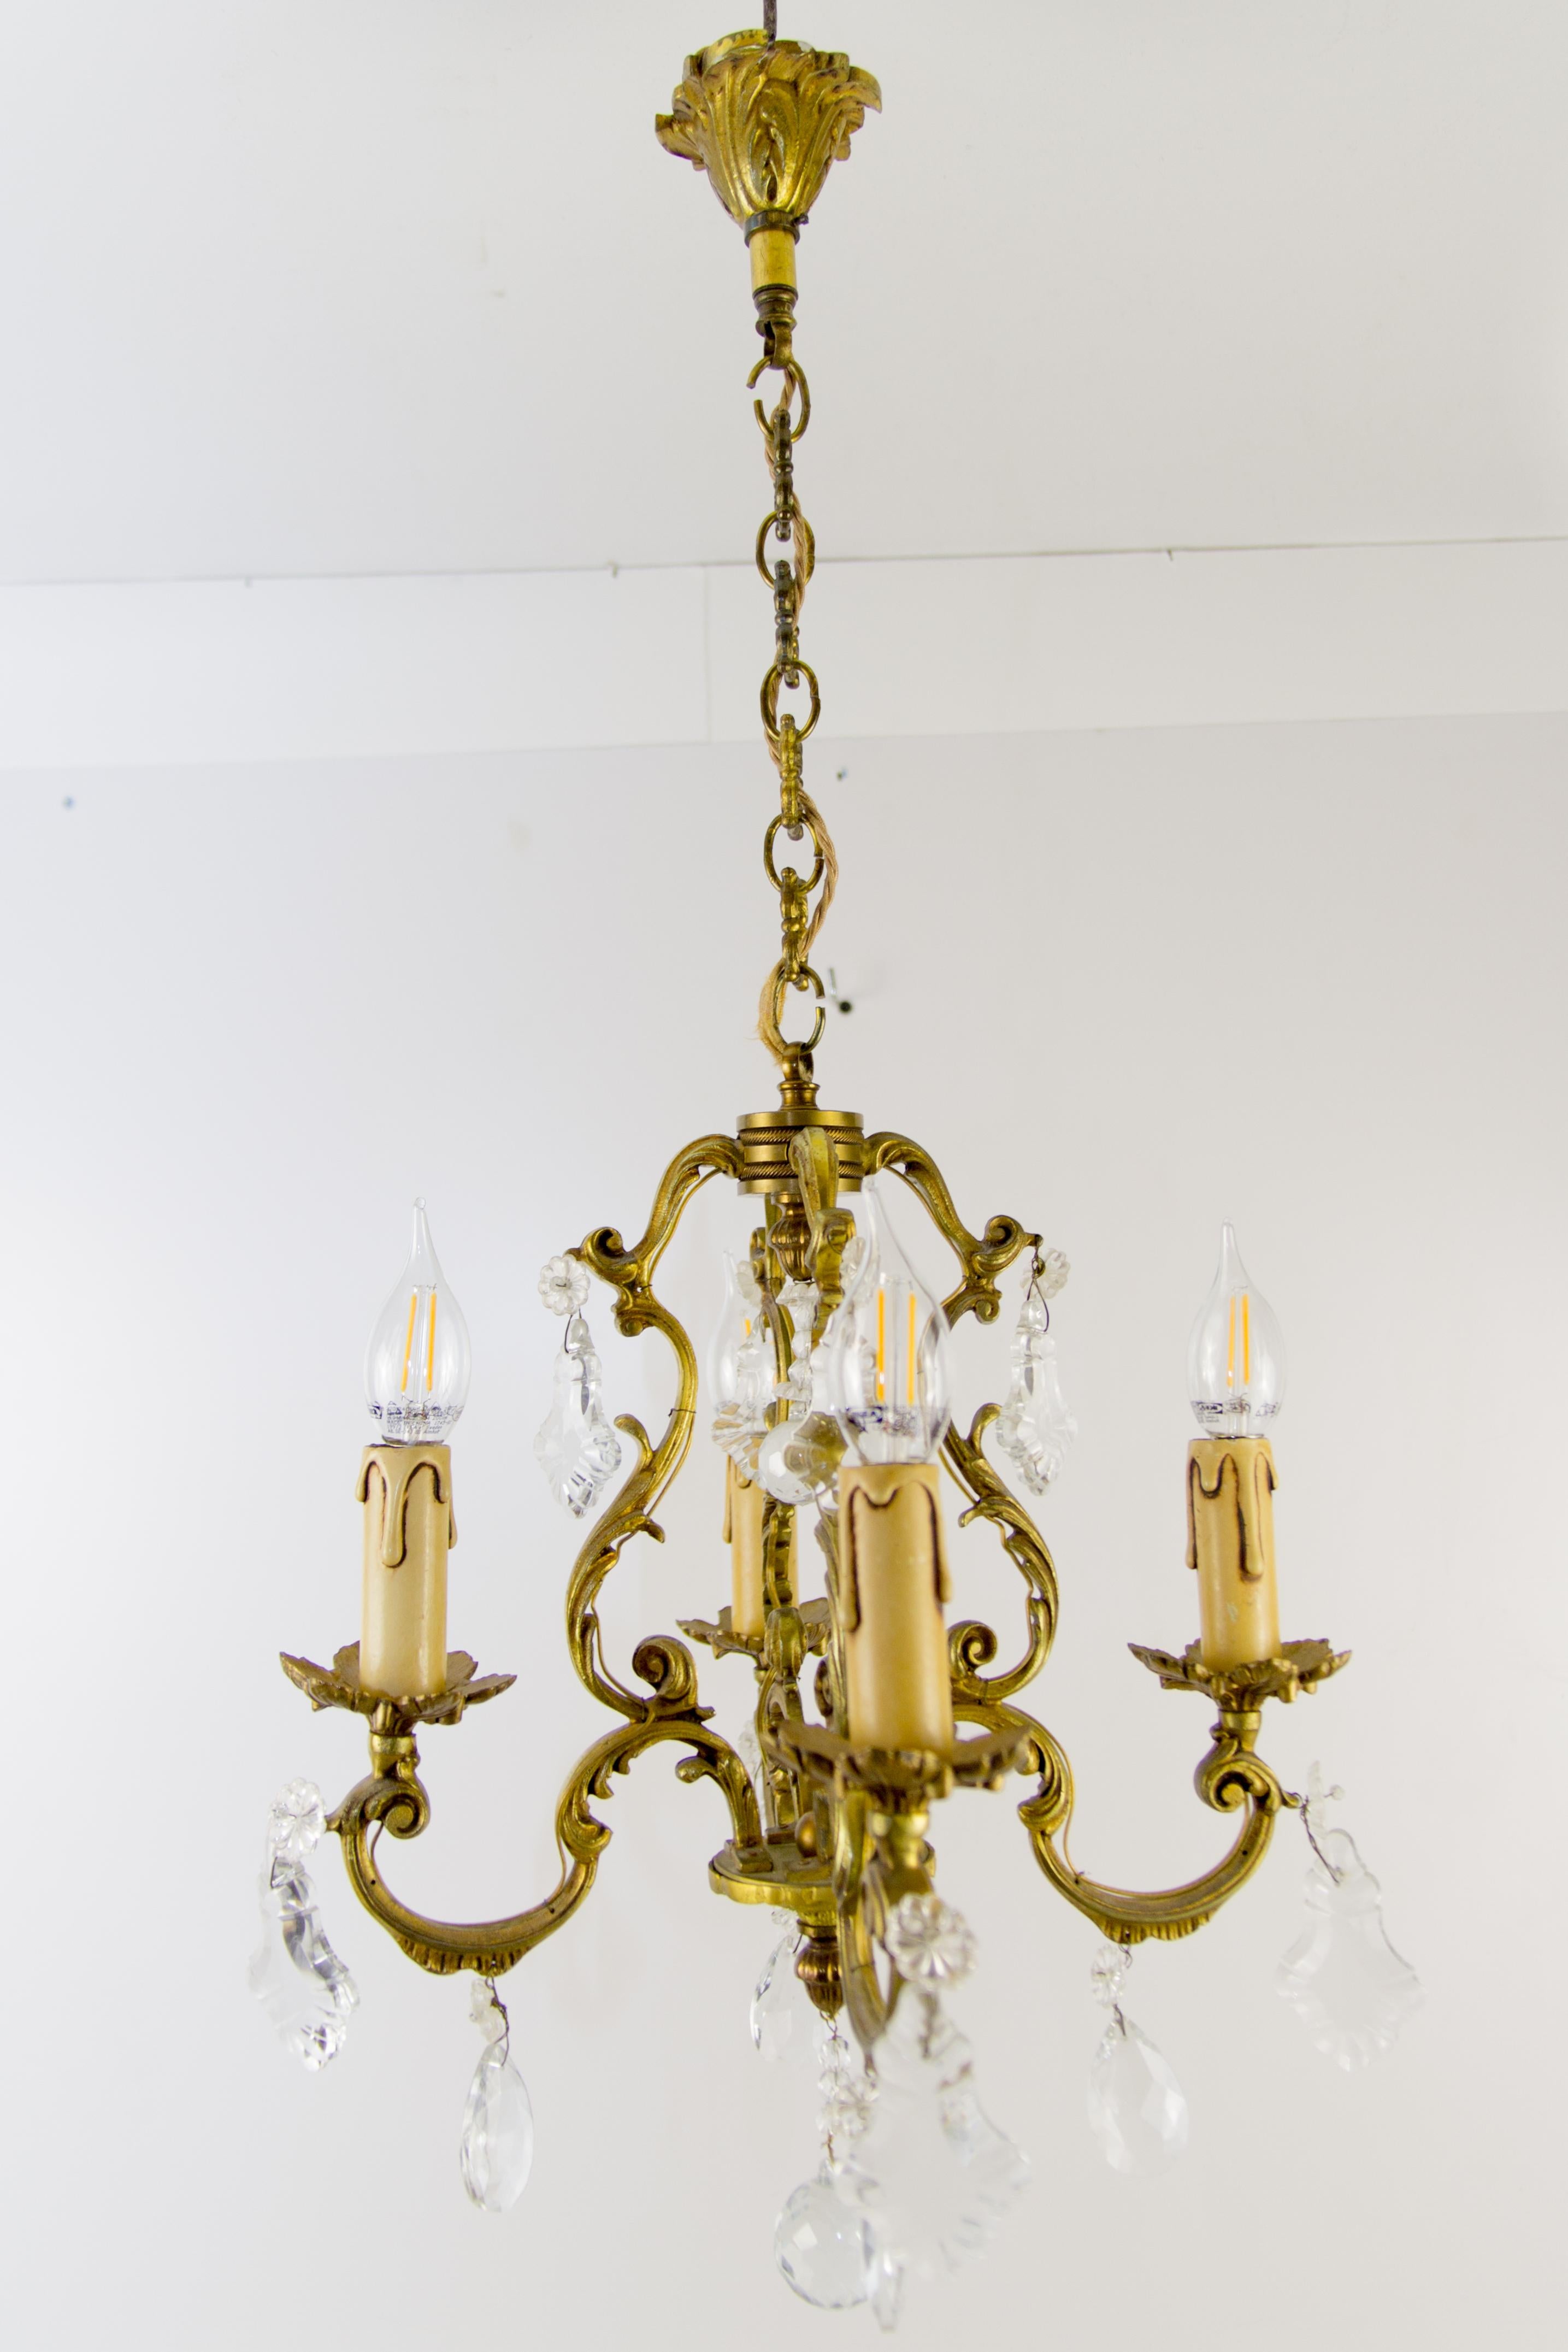 Very nice Louis XV or Rococo style vintage bronze and crystal four-light chandelier.
Four bronze arms, each with a socket for an E14-size light bulb.
Measures: height is 29.33 inches / 74.5 cm with chain, 21.65 in / 55 cm without chain; diameter –